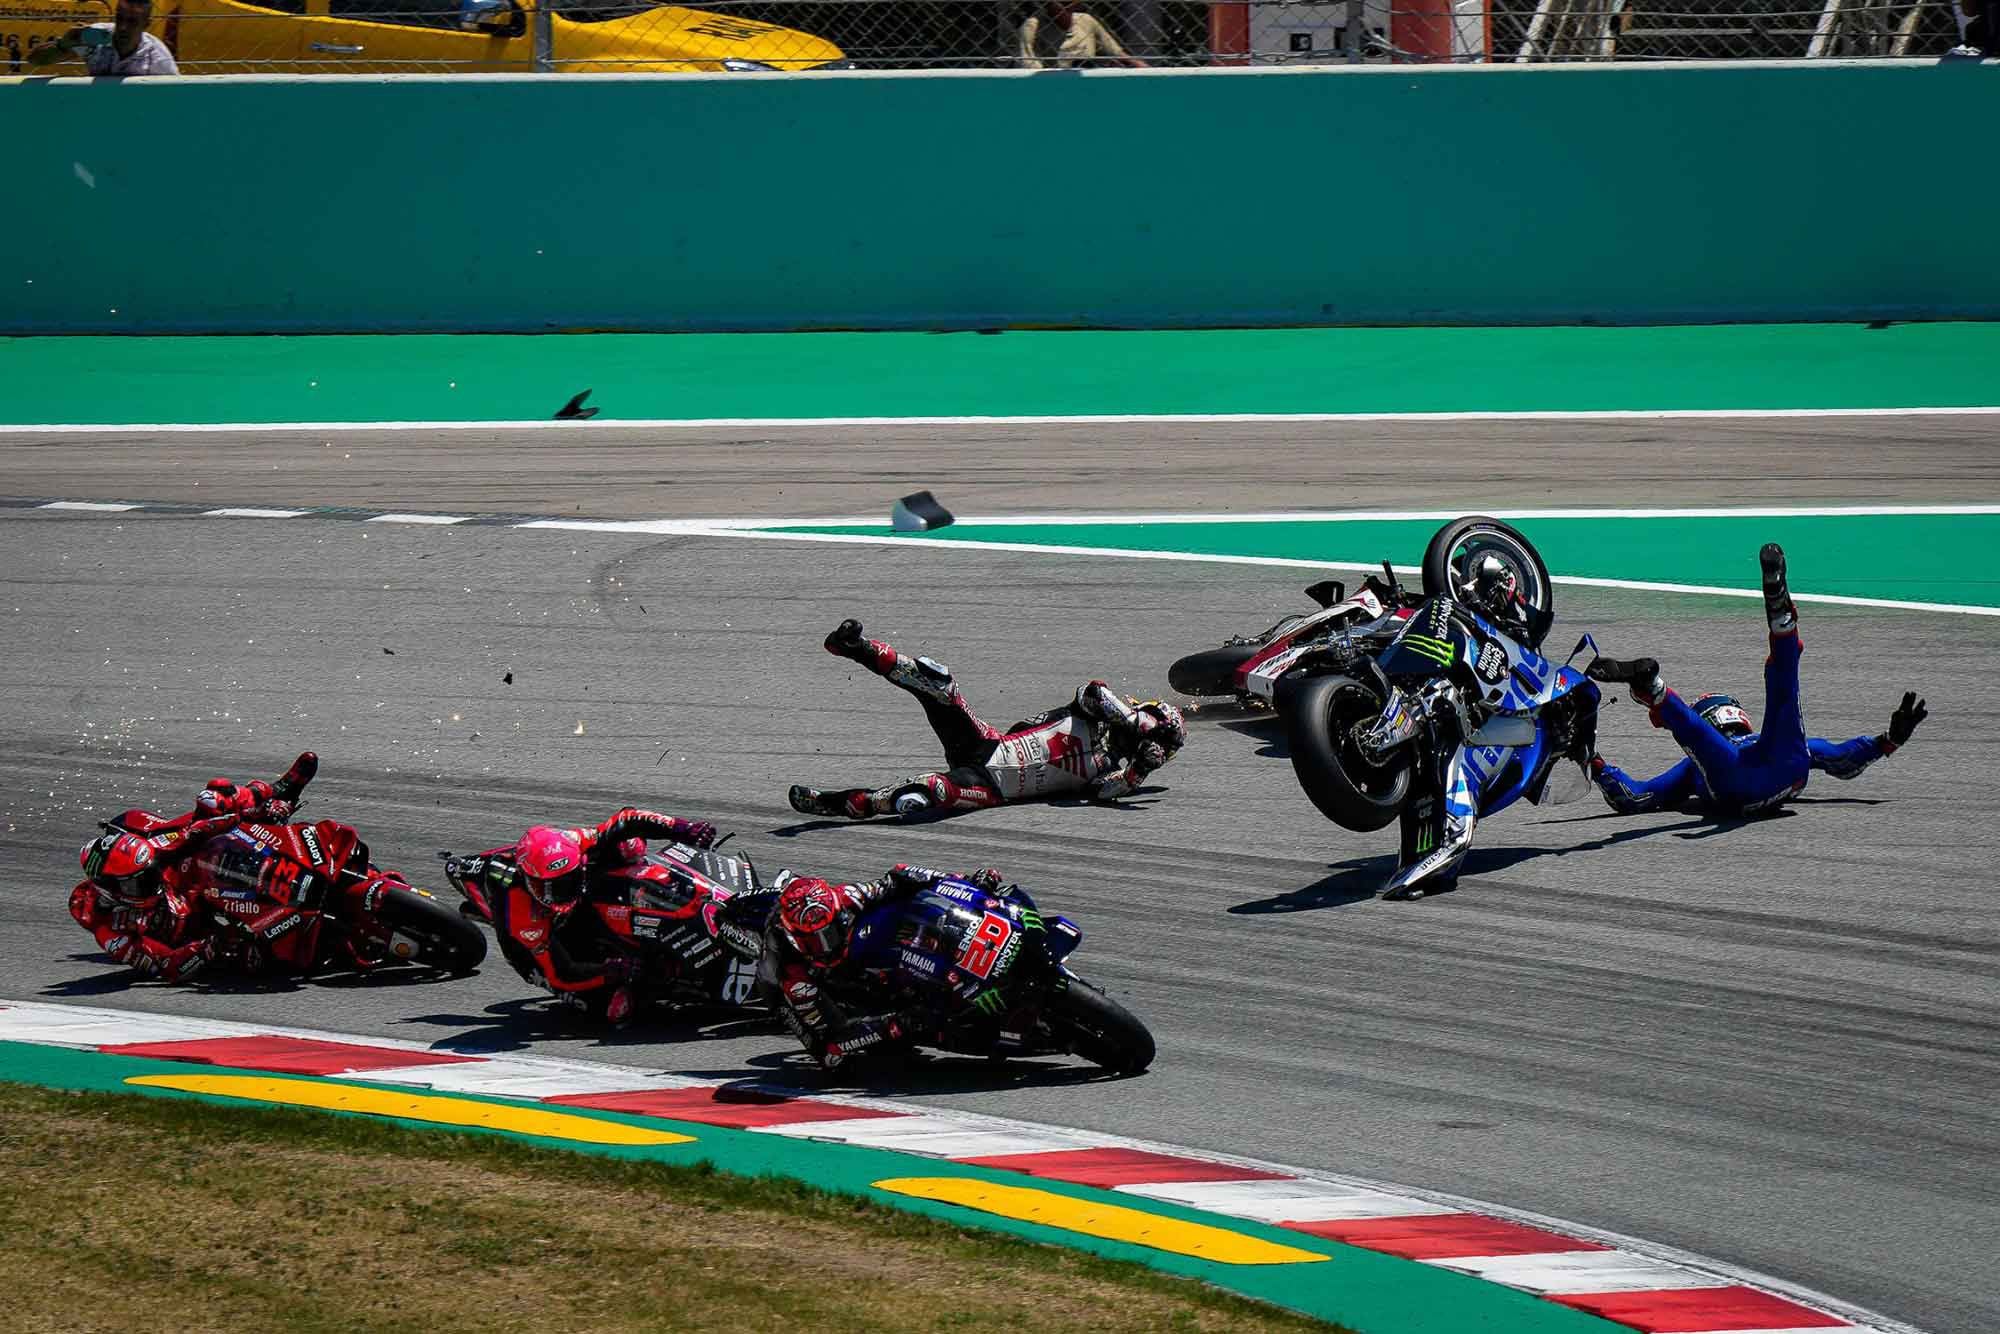 The first of multiple crashes during the Catalunya MotoGP round: Takaaki Nakagami bowled down Álex Rins and Francesco Bagnaia as he lost the front going into turn 1 at the start of the race. Several riders crashed out with front-end washouts.